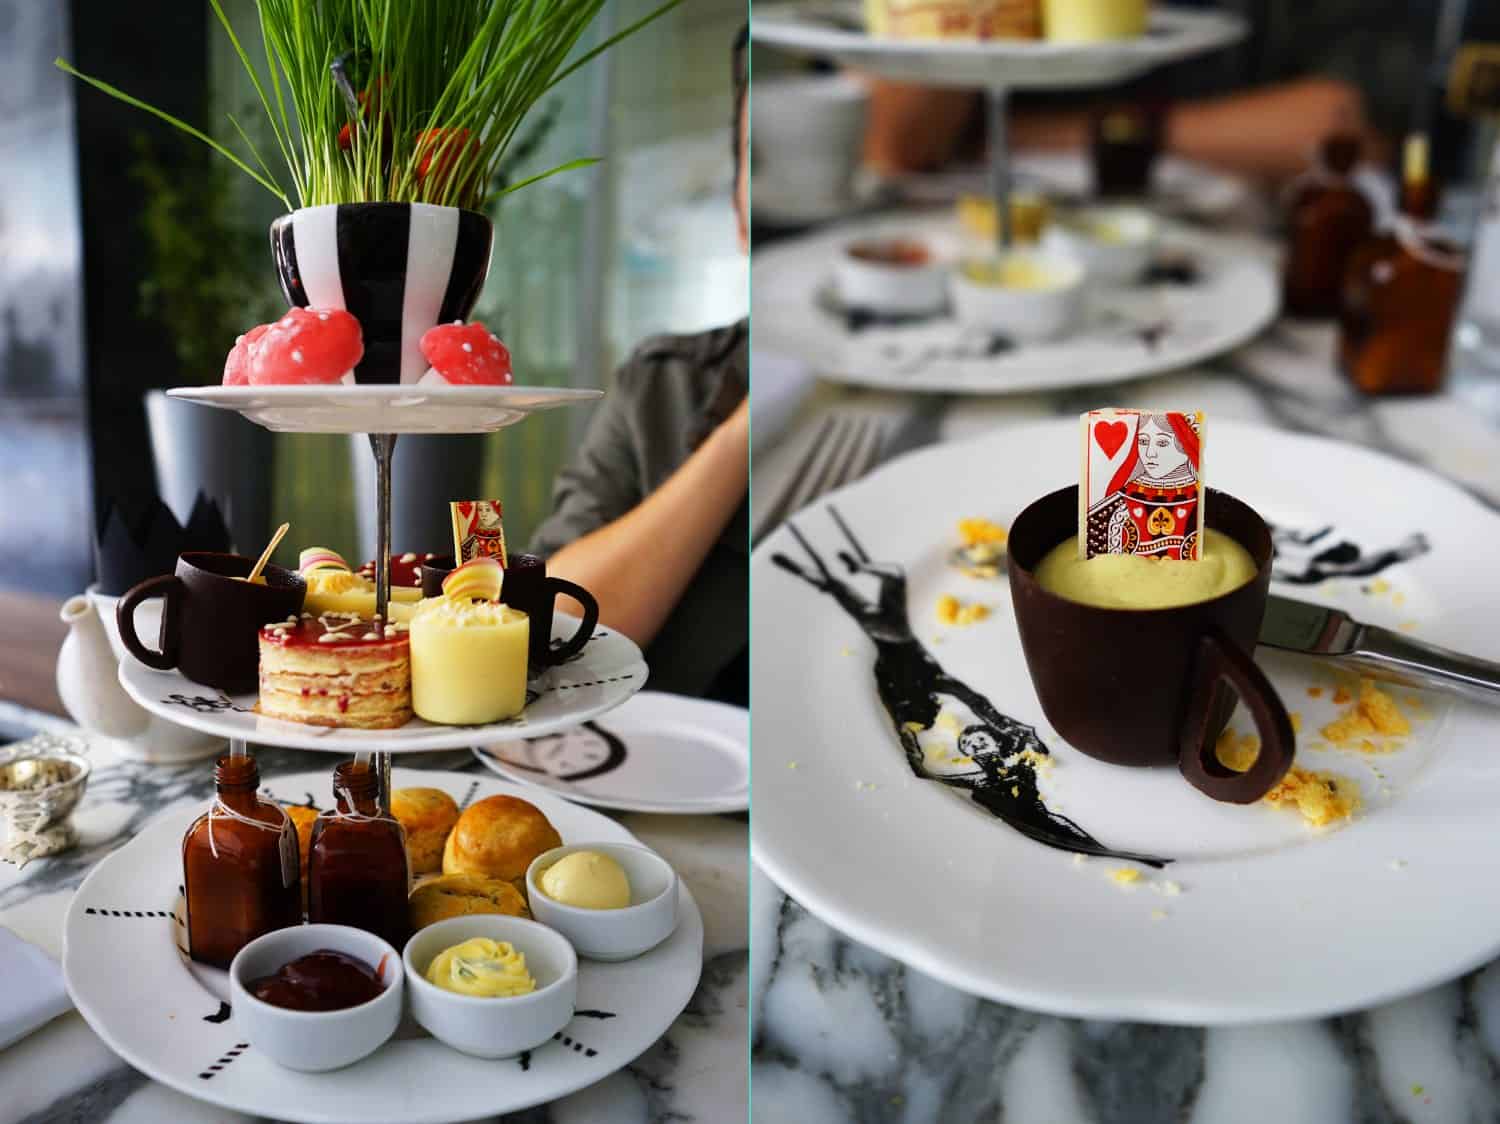 Mad Hatters-themed Afternoon Tea at the Sanderson Hotel, in London